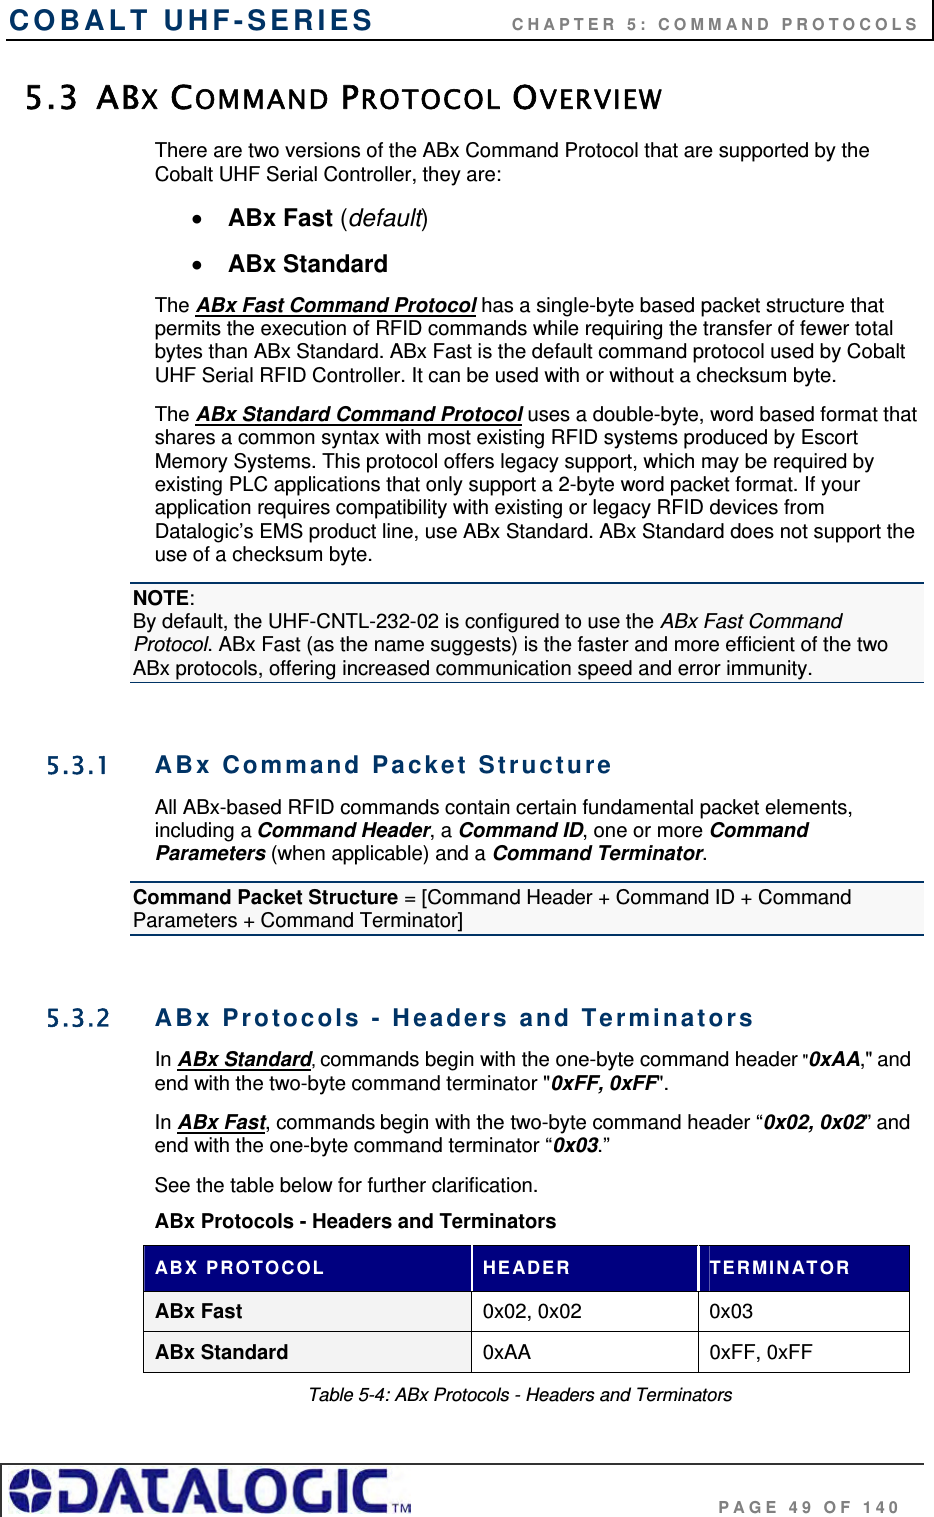 COBALT UHF-SERIES    CHAPTER 5: COMMAND PROTOCOLS                                     PAGE 49 OF 140 5.3 ABX COMMAND PROTOCOL OVERVIEW There are two versions of the ABx Command Protocol that are supported by the Cobalt UHF Serial Controller, they are:   ABx Fast (default)  ABx Standard The ABx Fast Command Protocol has a single-byte based packet structure that permits the execution of RFID commands while requiring the transfer of fewer total bytes than ABx Standard. ABx Fast is the default command protocol used by Cobalt UHF Serial RFID Controller. It can be used with or without a checksum byte. The ABx Standard Command Protocol uses a double-byte, word based format that shares a common syntax with most existing RFID systems produced by Escort Memory Systems. This protocol offers legacy support, which may be required by existing PLC applications that only support a 2-byte word packet format. If your application requires compatibility with existing or legacy RFID devices from Datalogic’s EMS product line, use ABx Standard. ABx Standard does not support the use of a checksum byte. NOTE: By default, the UHF-CNTL-232-02 is configured to use the ABx Fast Command Protocol. ABx Fast (as the name suggests) is the faster and more efficient of the two ABx protocols, offering increased communication speed and error immunity.   5.3.1  ABx Command Packet Structure All ABx-based RFID commands contain certain fundamental packet elements, including a Command Header, a Command ID, one or more Command Parameters (when applicable) and a Command Terminator. Command Packet Structure = [Command Header + Command ID + Command Parameters + Command Terminator]  5.3.2  ABx Protocols - Headers and Terminators In ABx Standard, commands begin with the one-byte command header &quot;0xAA,&quot; and end with the two-byte command terminator &quot;0xFF, 0xFF&quot;.  In ABx Fast, commands begin with the two-byte command header “0x02, 0x02” and end with the one-byte command terminator “0x03.”  See the table below for further clarification. ABx Protocols - Headers and Terminators ABX PROTOCOL  HEADER  TERMINATOR ABx Fast  0x02, 0x02  0x03 ABx Standard  0xAA 0xFF, 0xFF Table 5-4: ABx Protocols - Headers and Terminators 